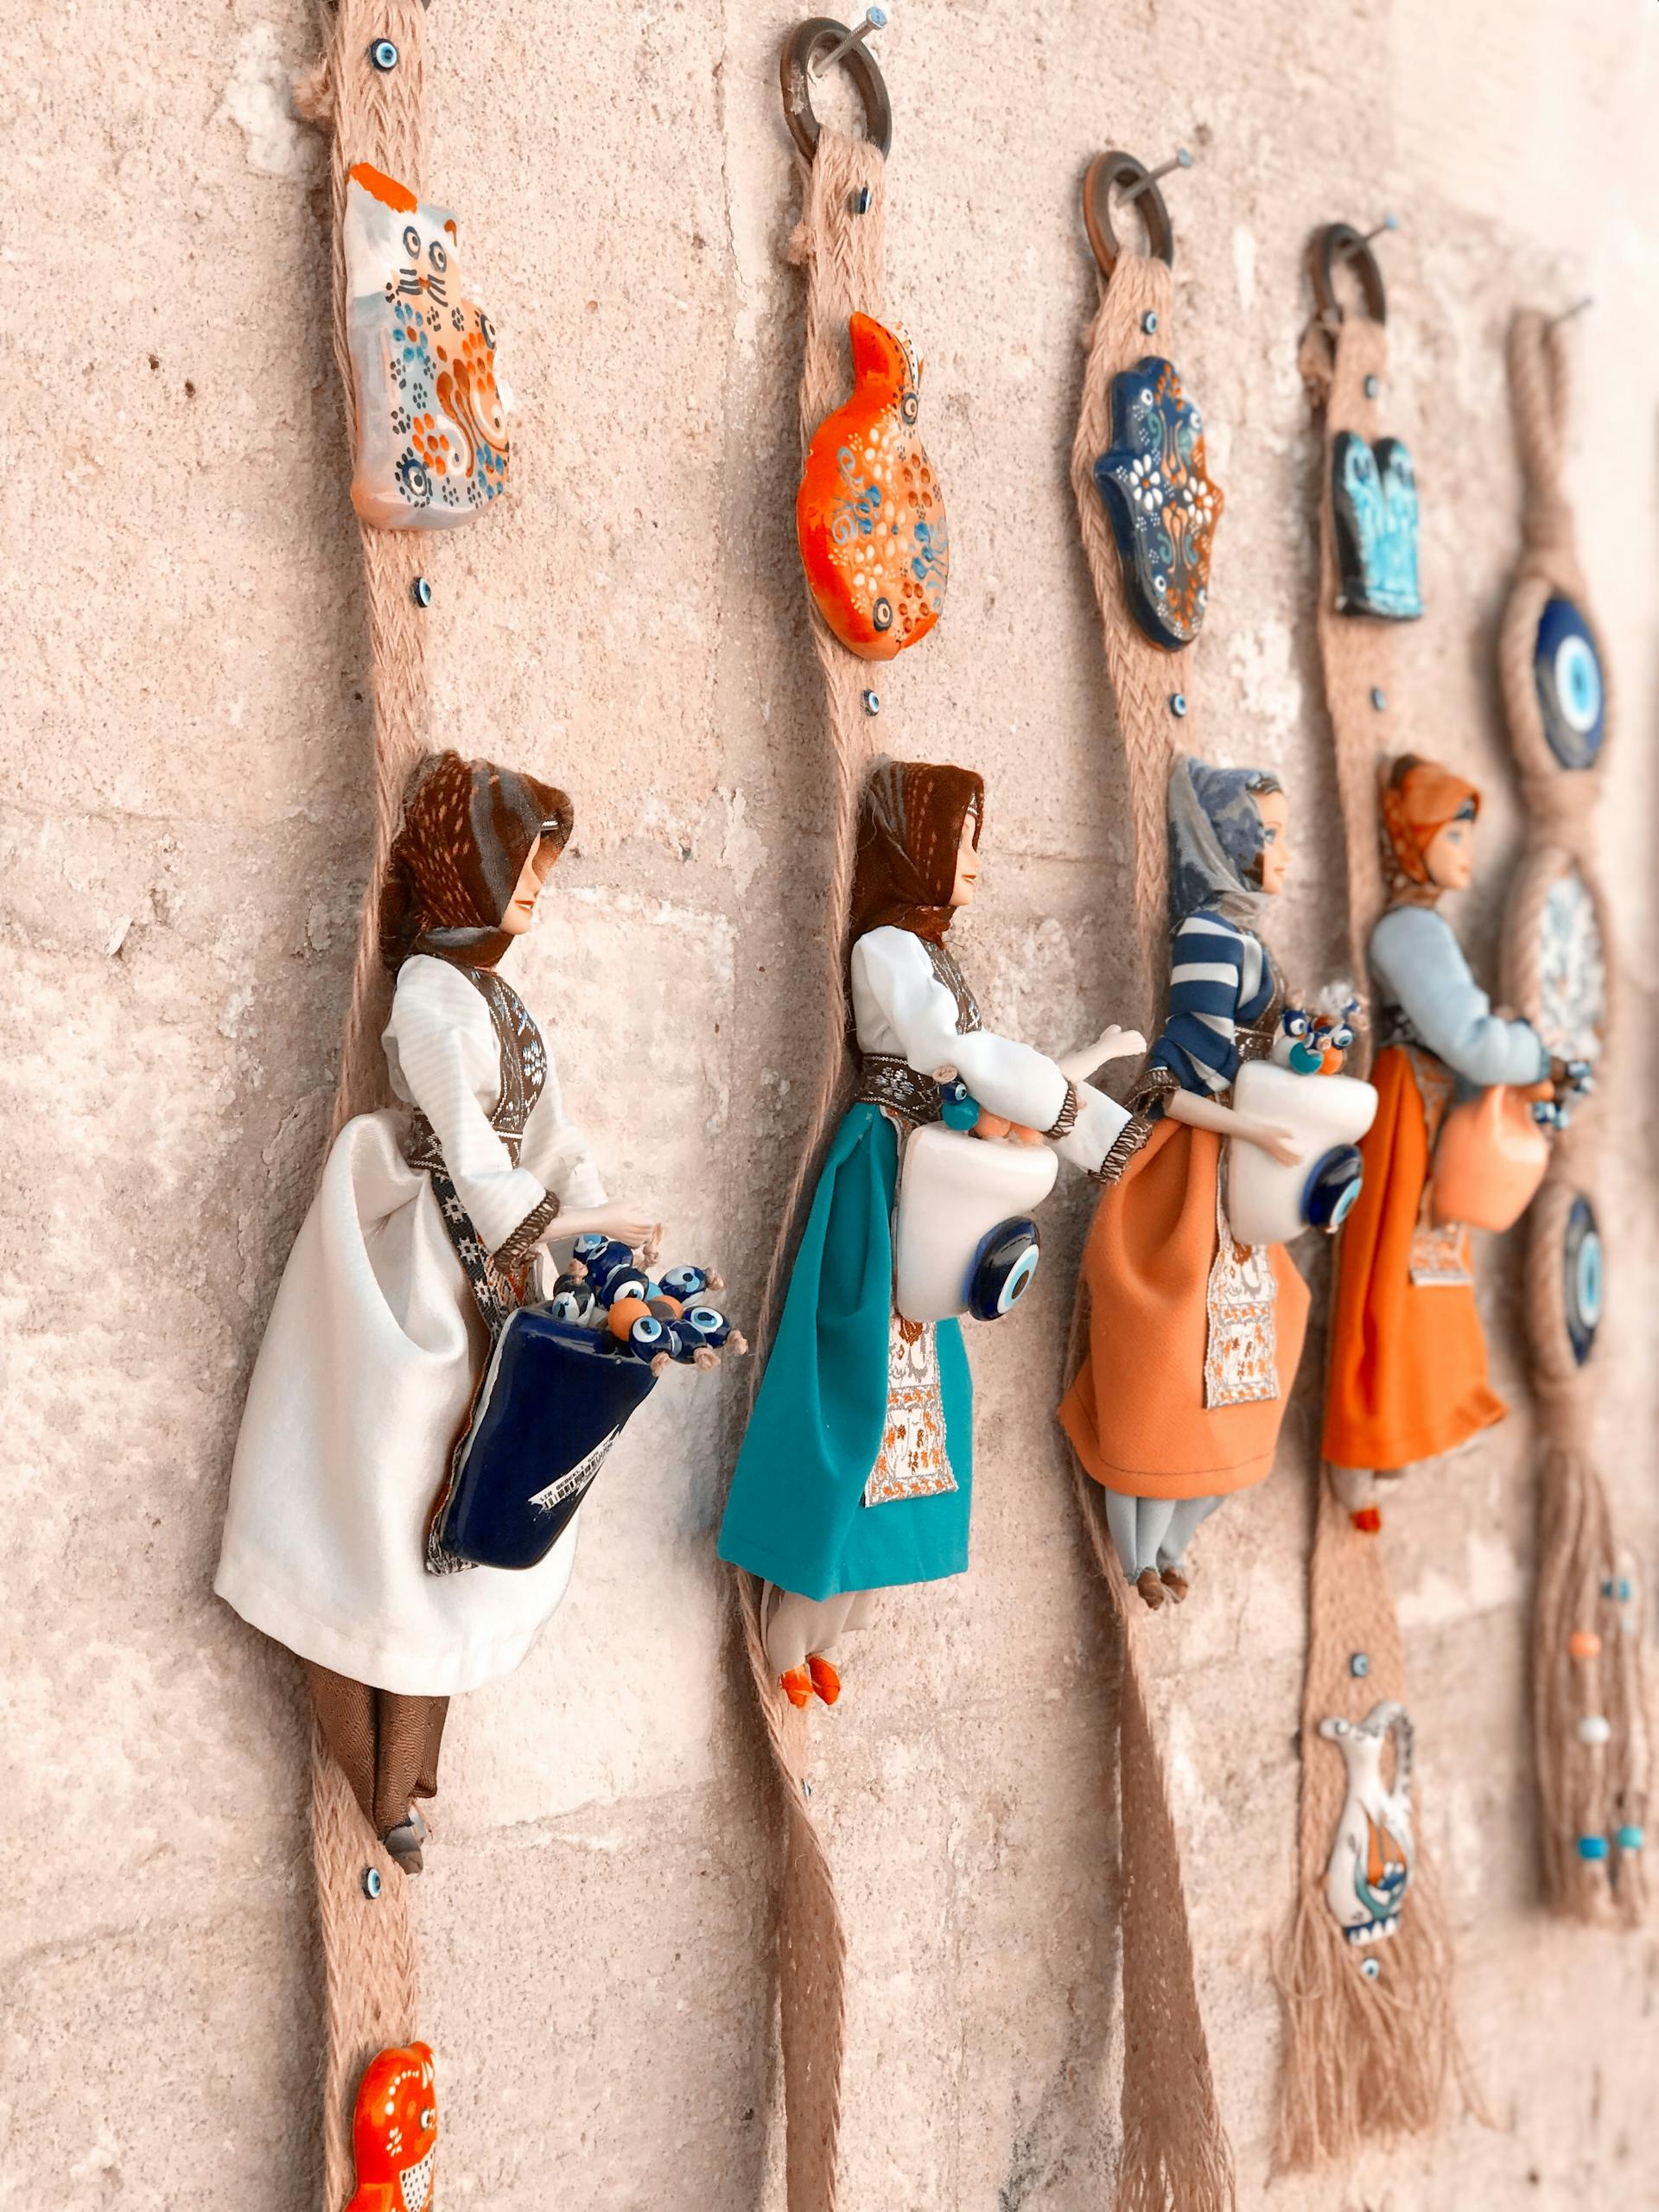 Dolls on a wall | Source: Pexels